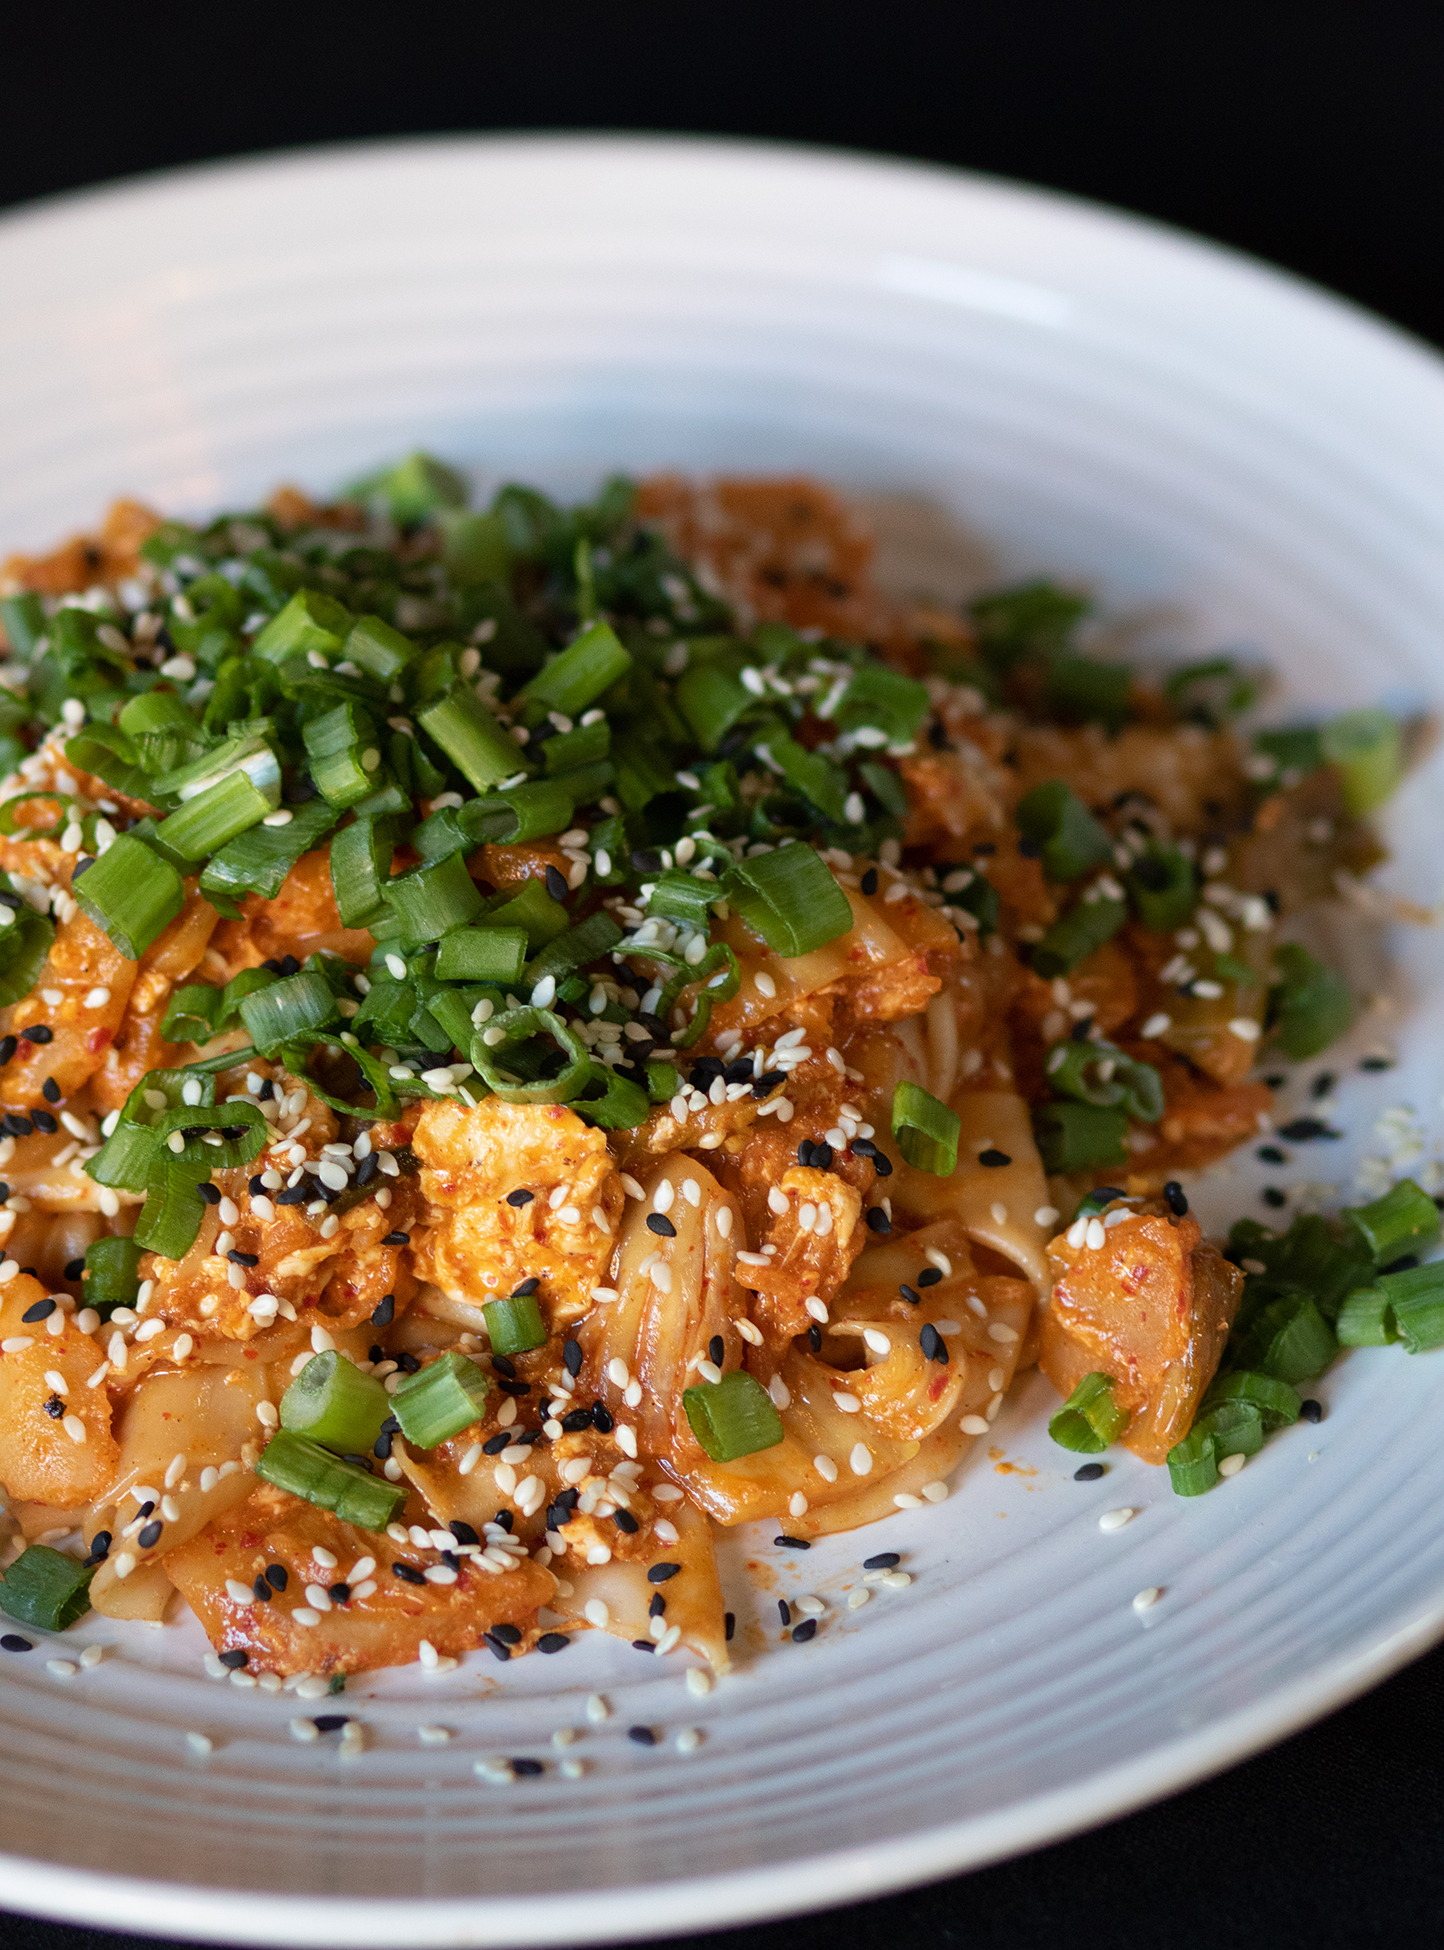 Housemade noodles with kimchee butter at Lo & Behold in Healdsburg. (Heather Irwin/The Press Democrat)